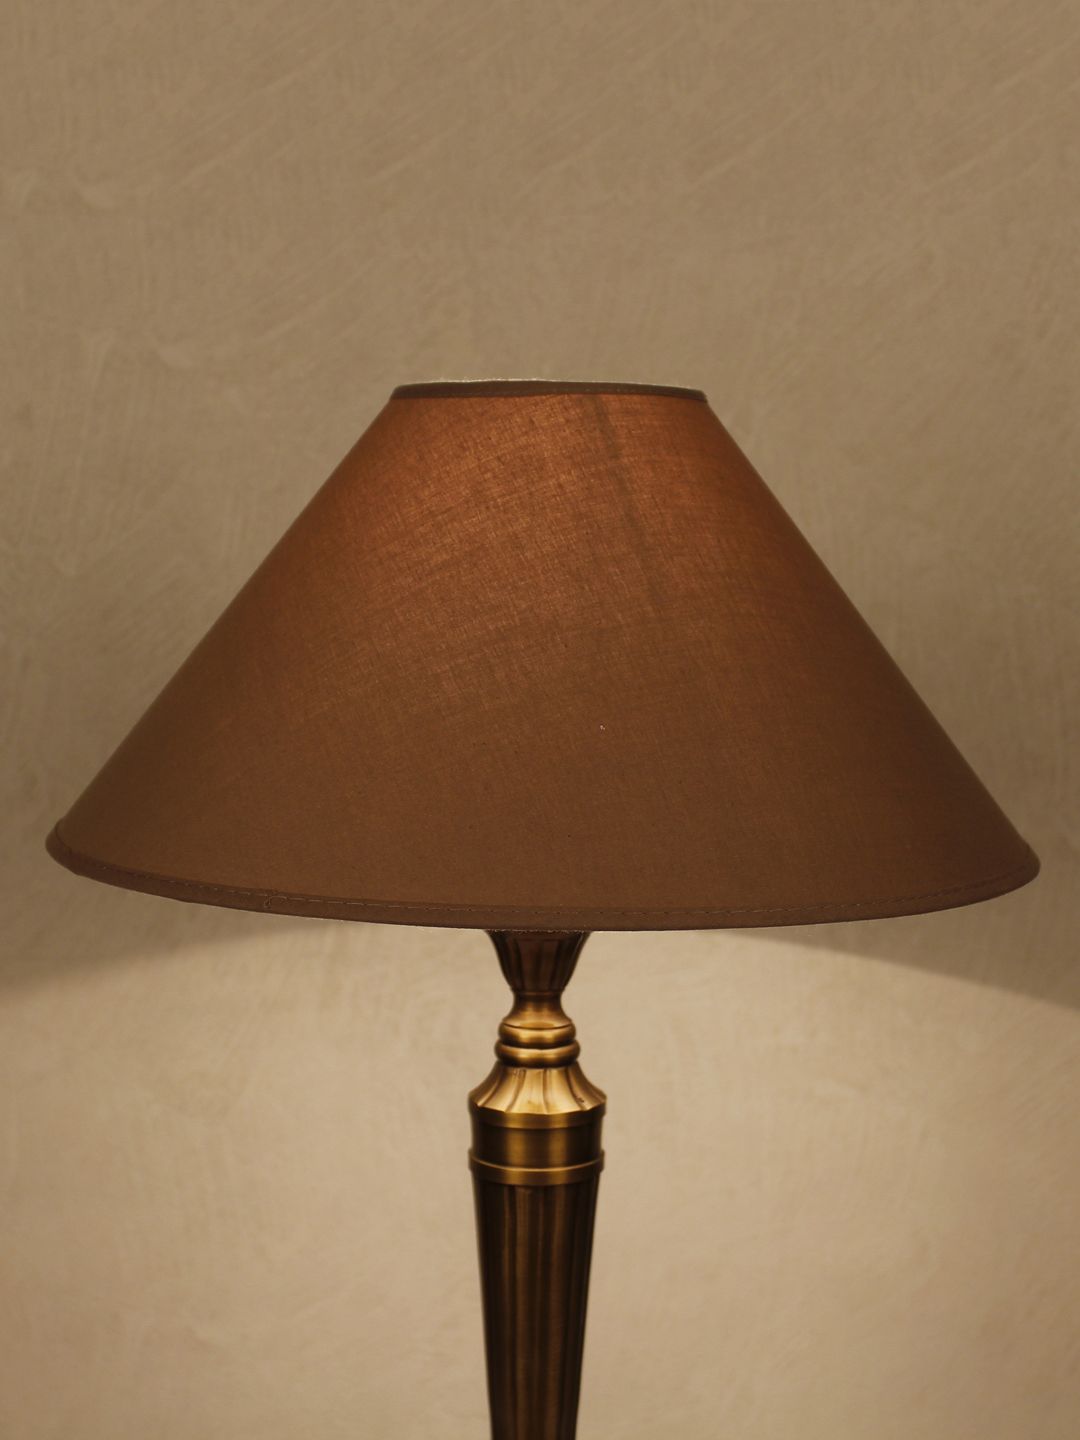 THE LIGHT STORE Beige Bedside Standard Table Top Lamp Price in India